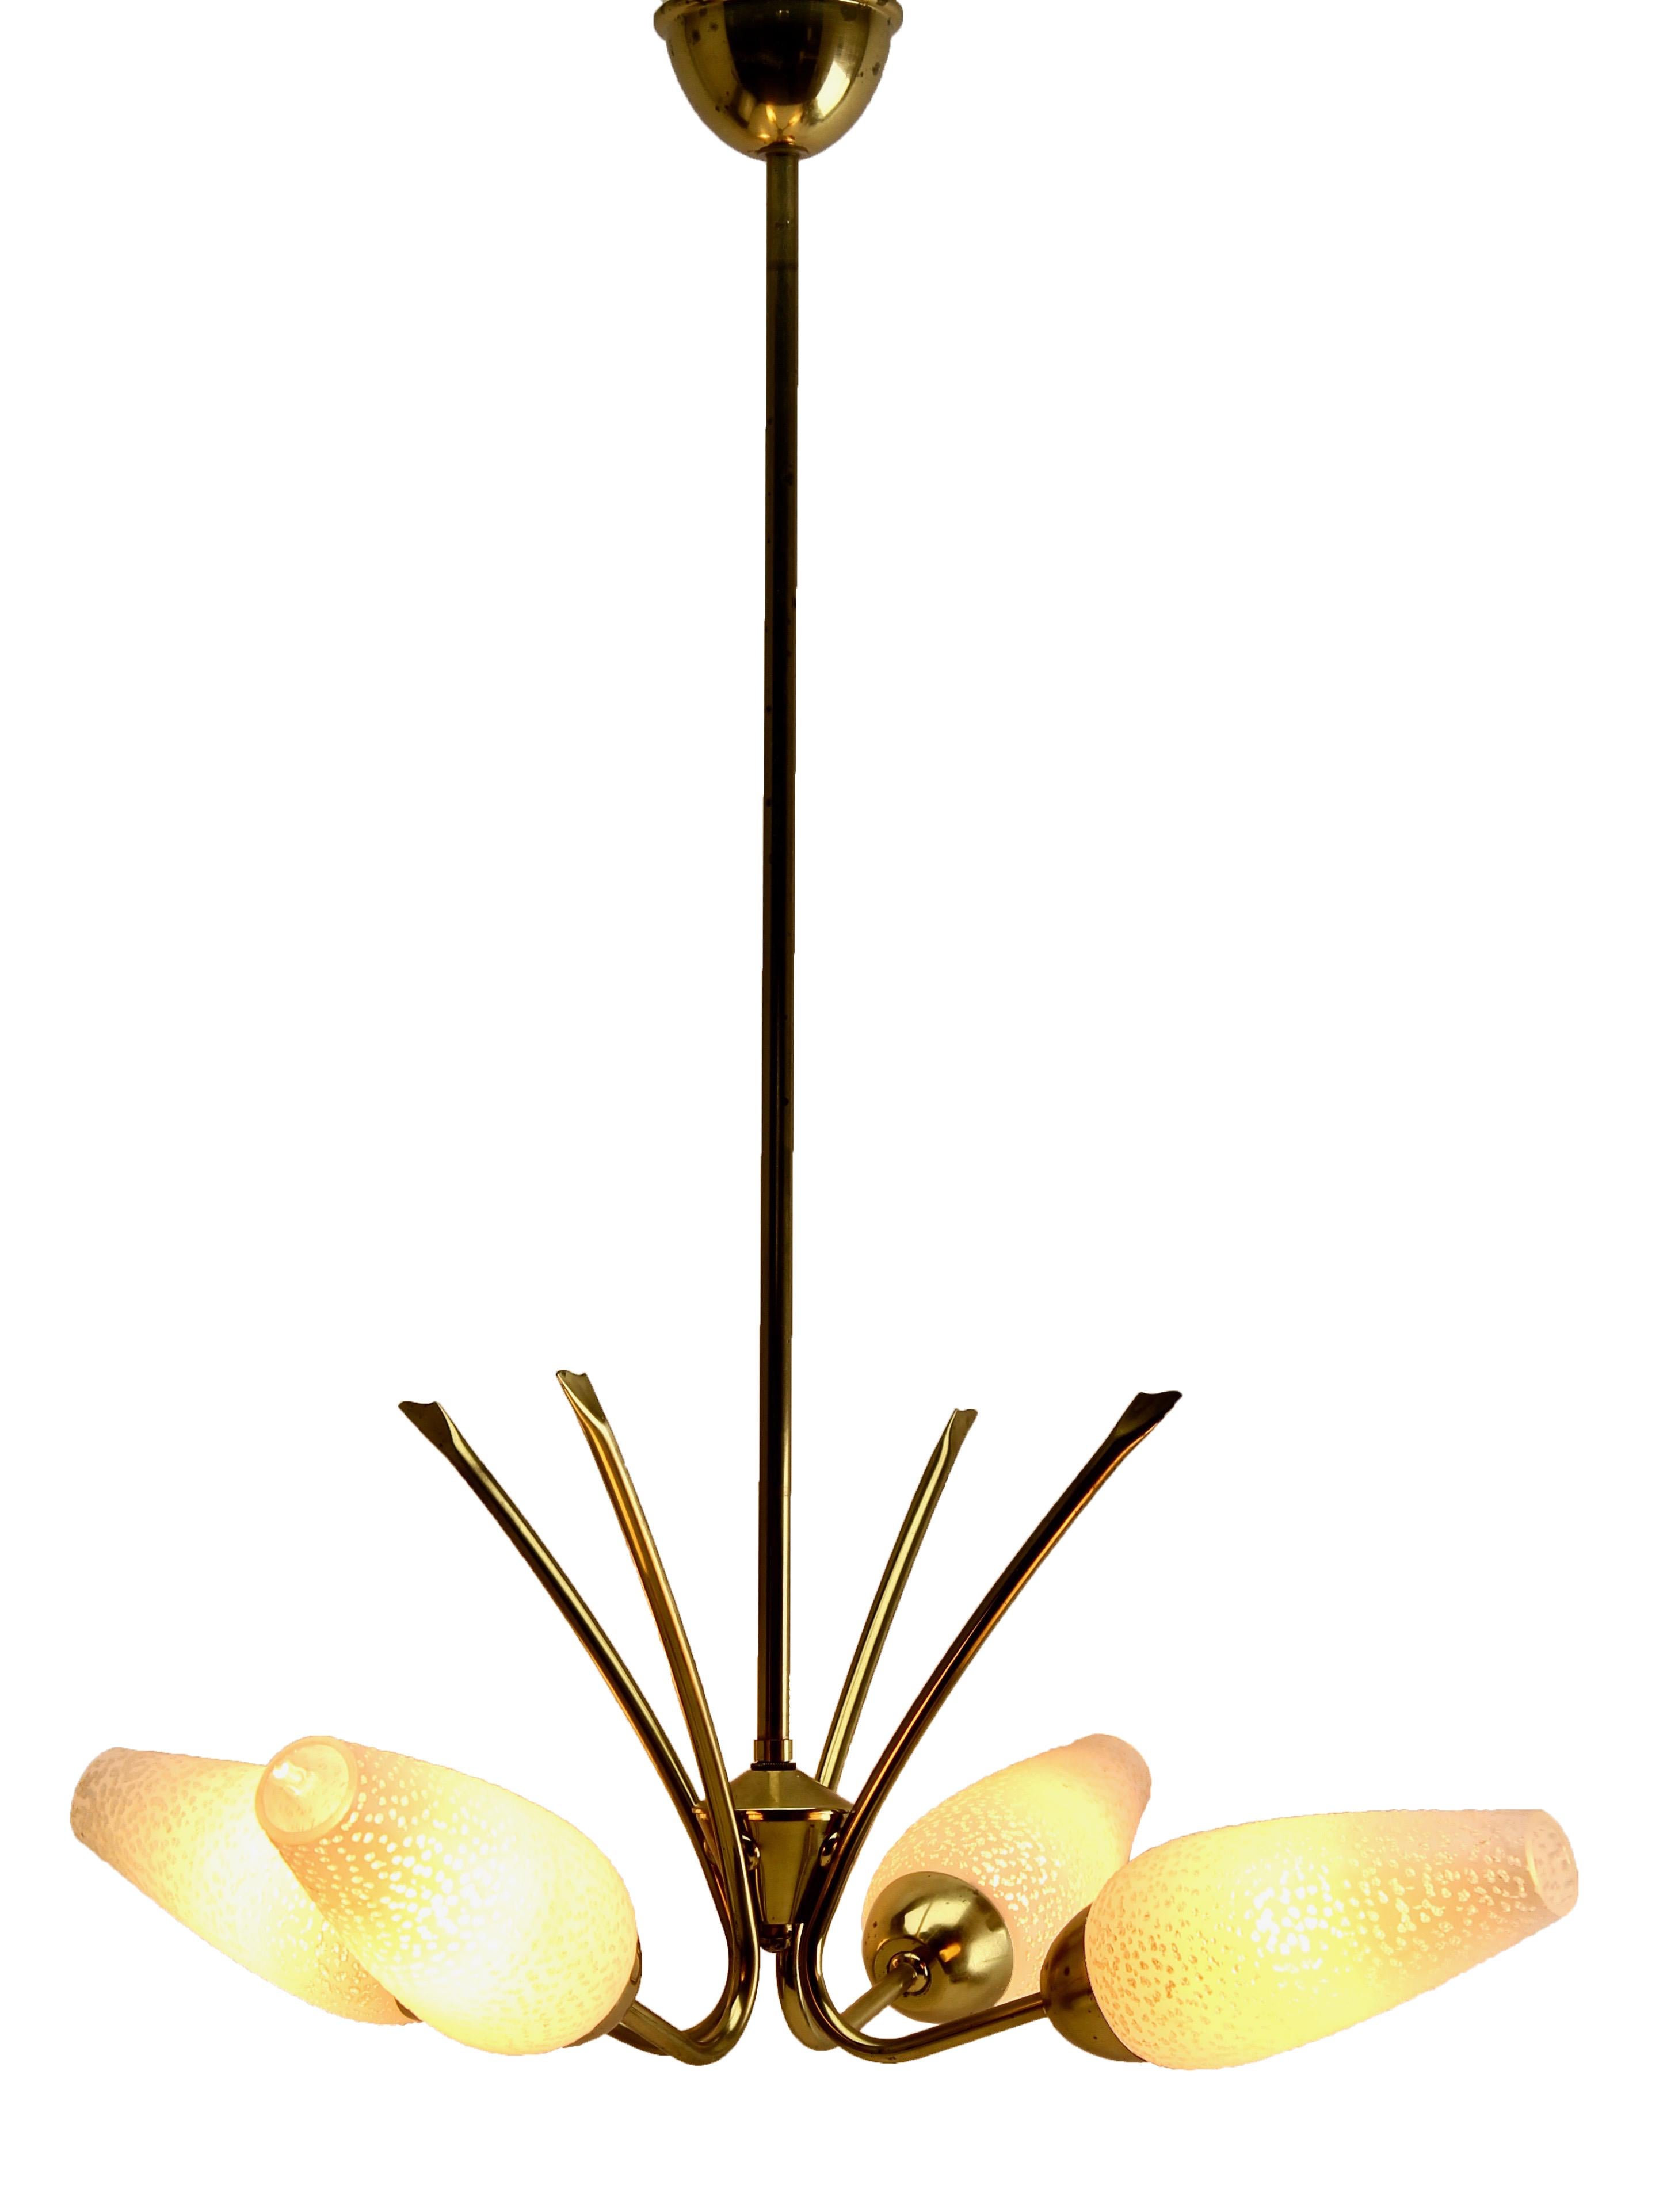 Four arms chandelier in the style of Stilnovo.

Photography fails to capture the simple elegant illumination provided by this lamp.

In excellent condition and in full working order. Fitting B22d, (Bc)
And safe for immediate usage in the USA

With